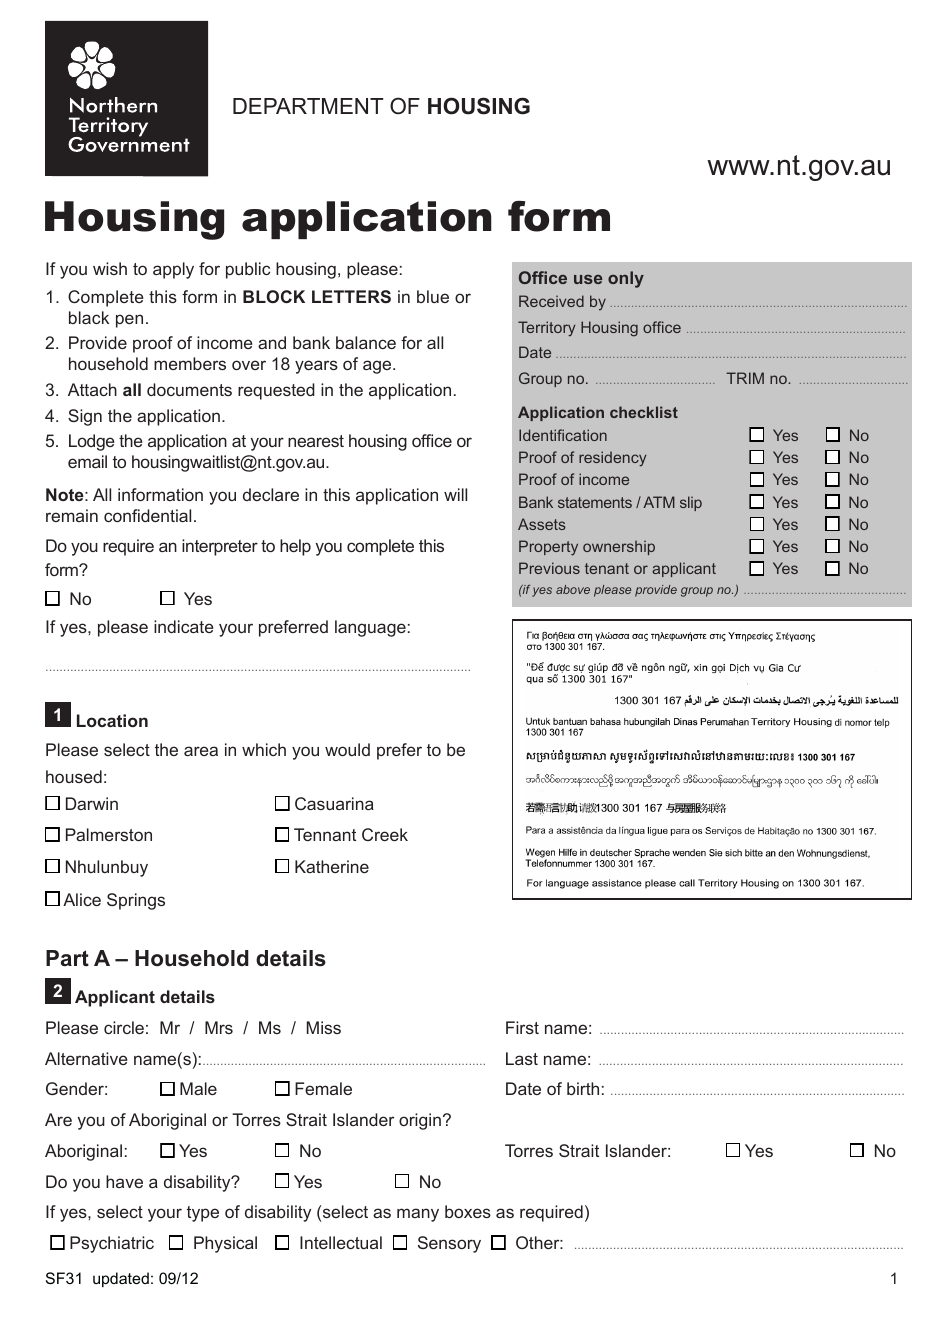 Form SF31 Housing Application Form - Northern Territory, Australia, Page 1